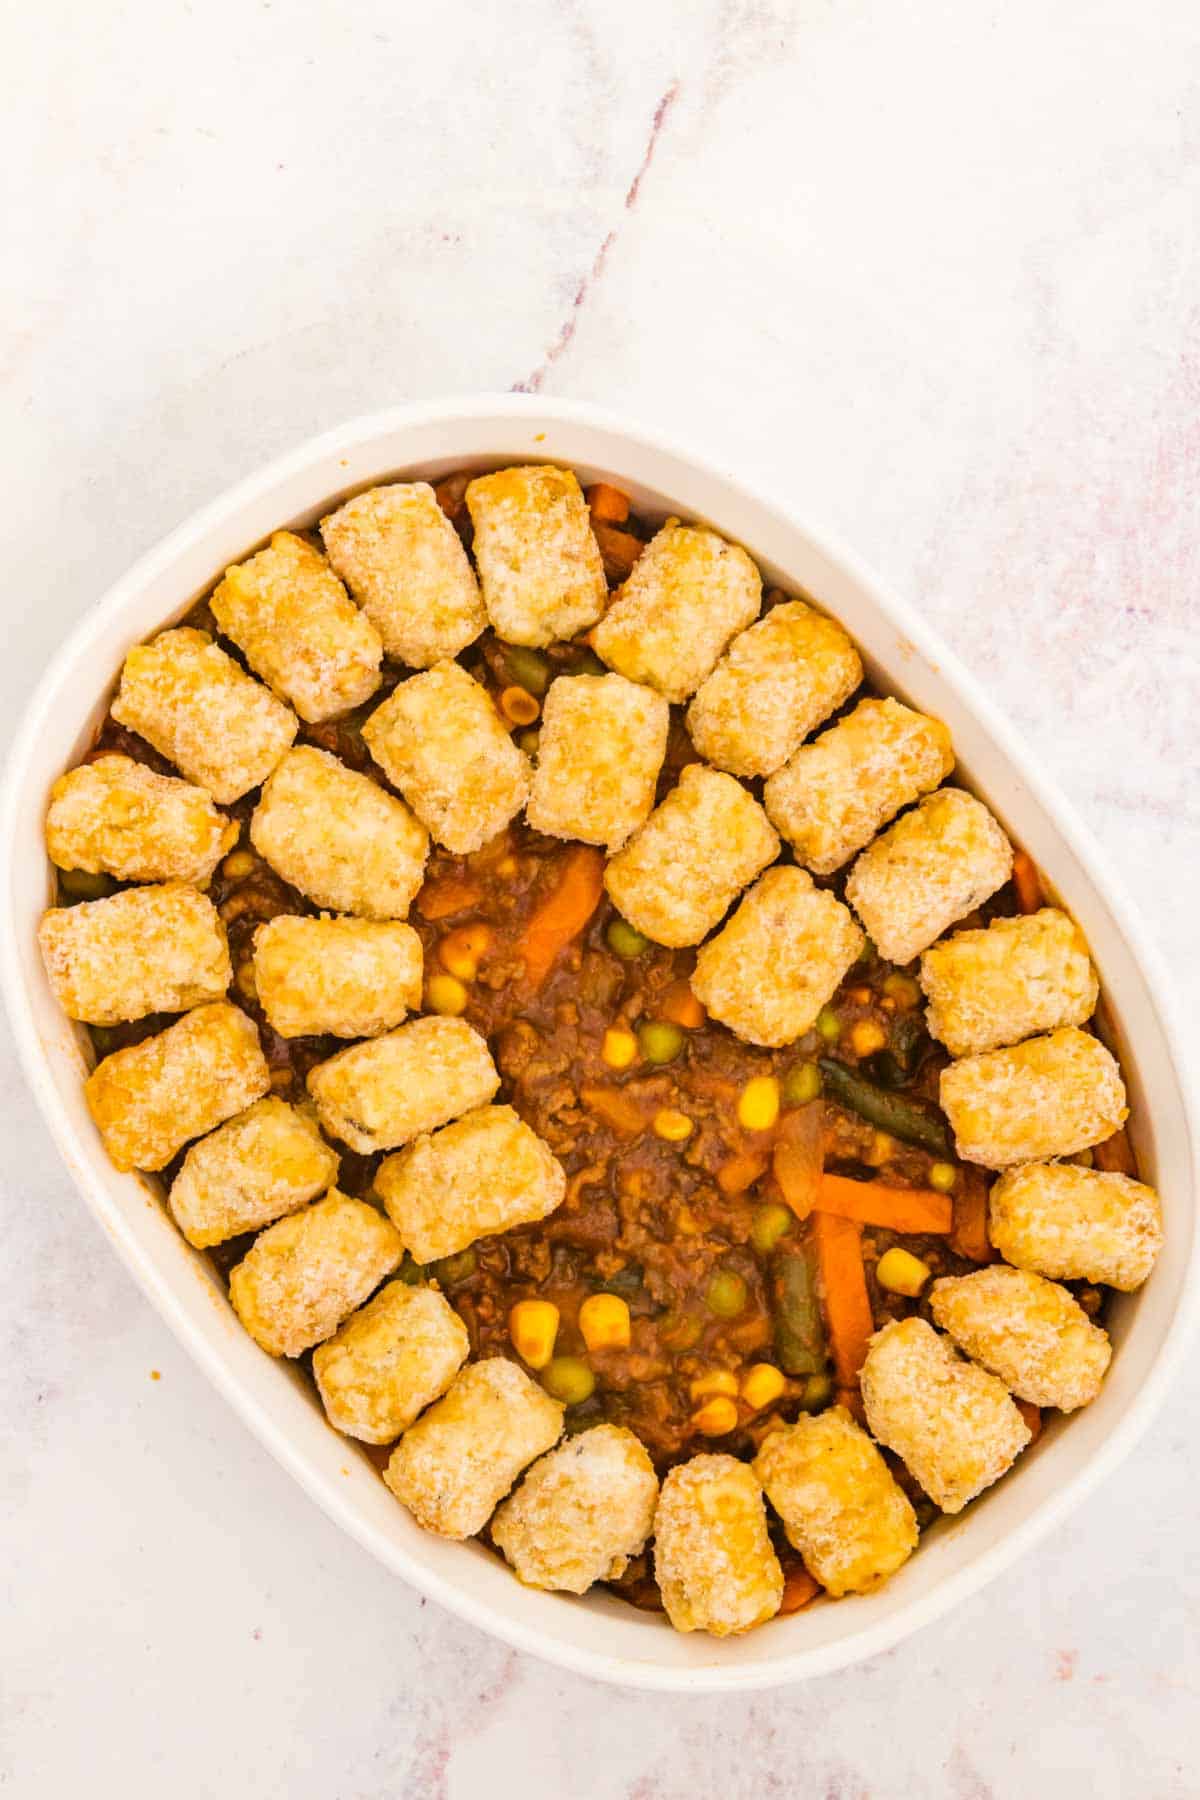 Tater tots are added over top the shepherd's pie filling in an oval casserole dish.